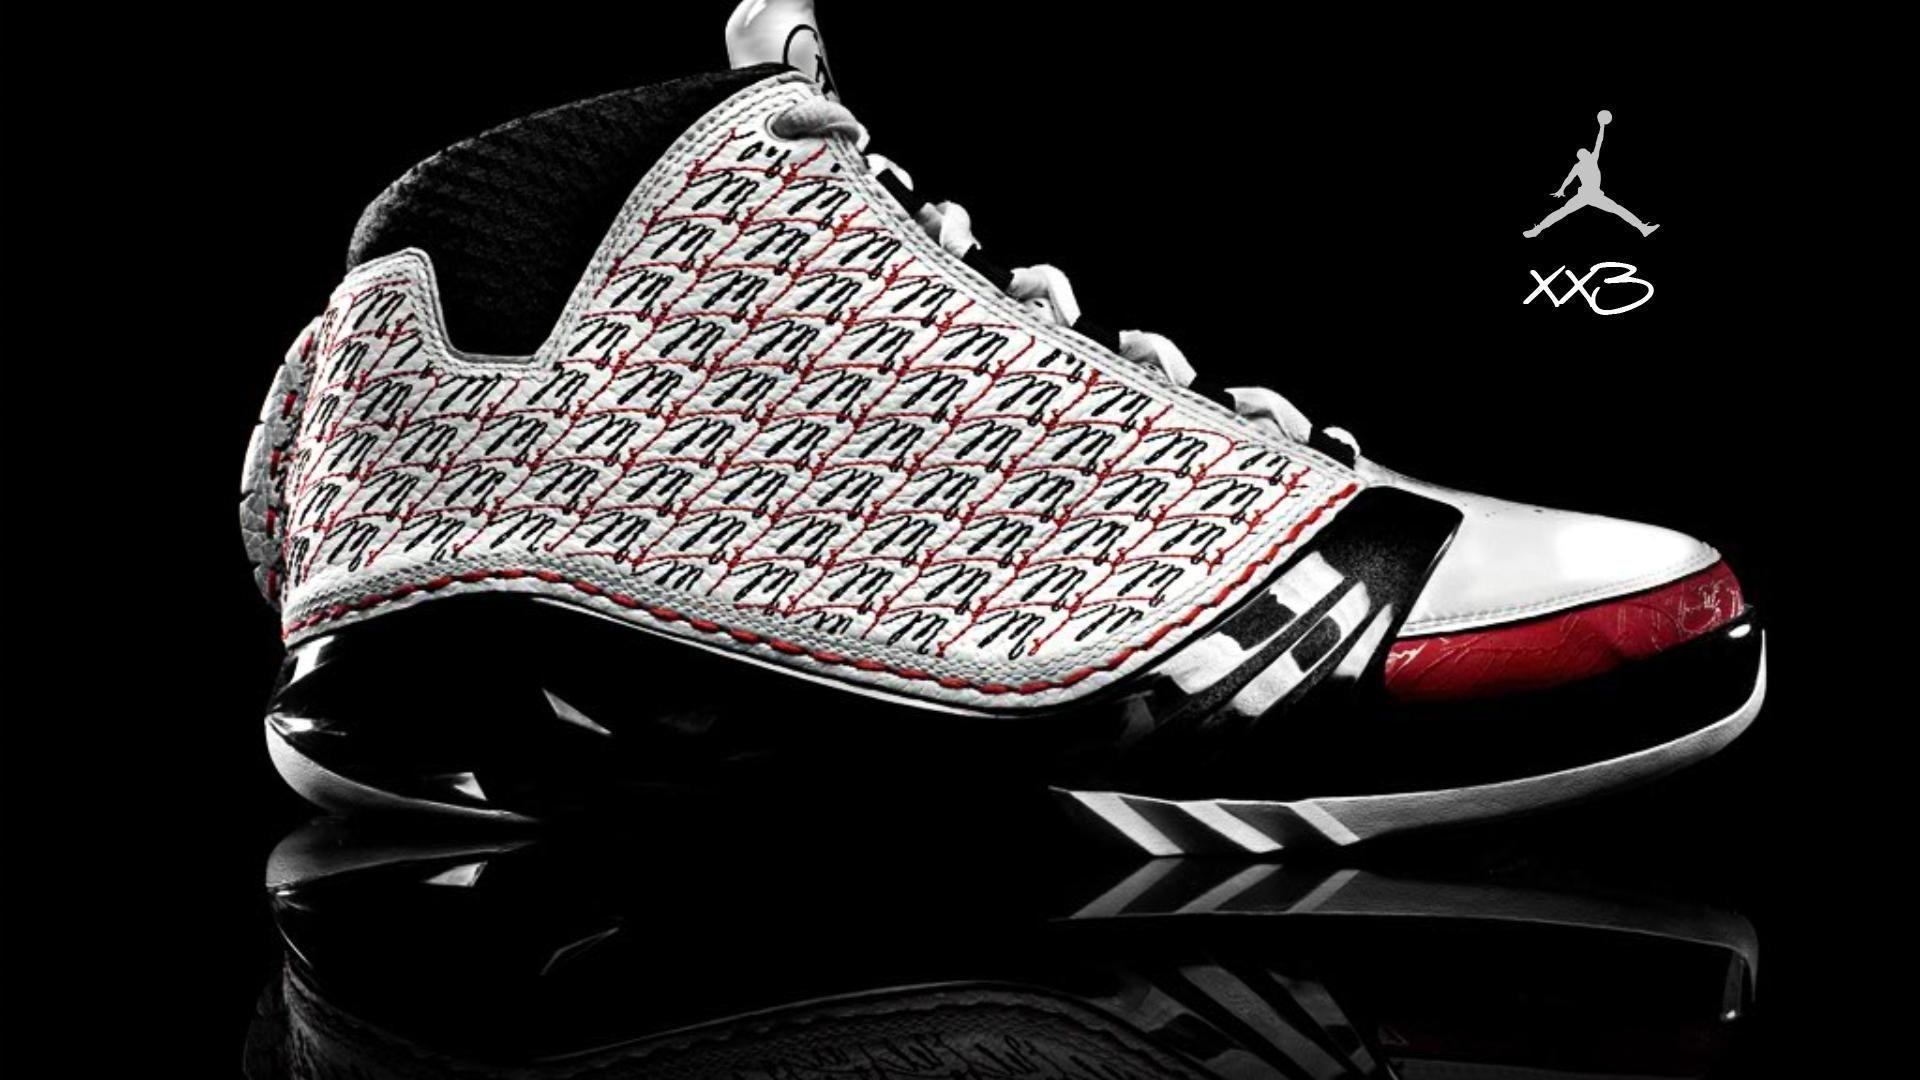 Michael Jordan Shoes Wallpaper. Free Photo Download For Android